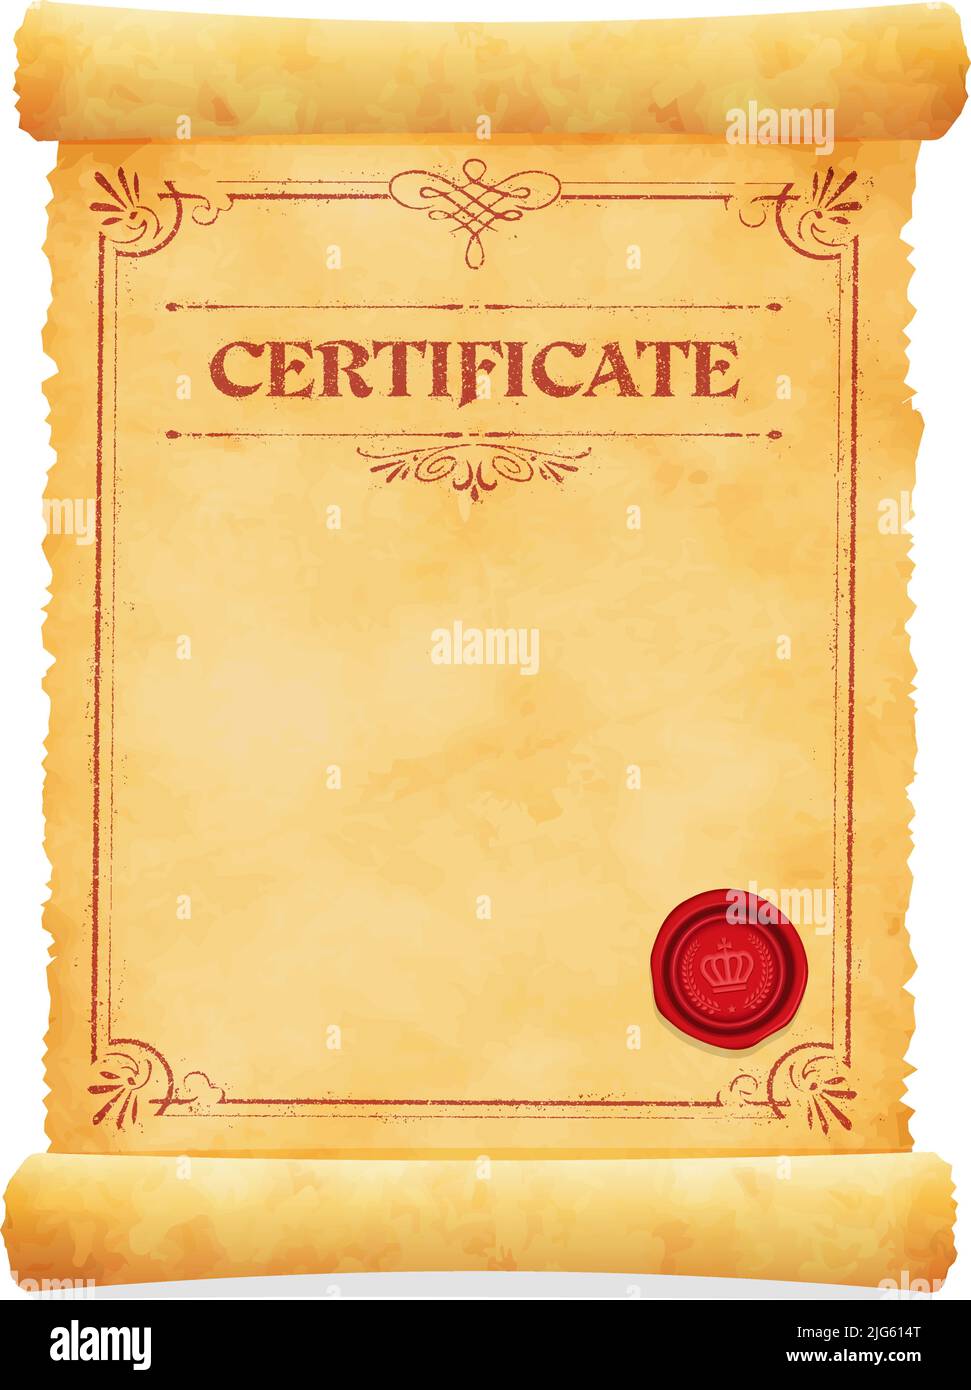 Certificate background Cut Out Stock Images & Pictures - Alamy